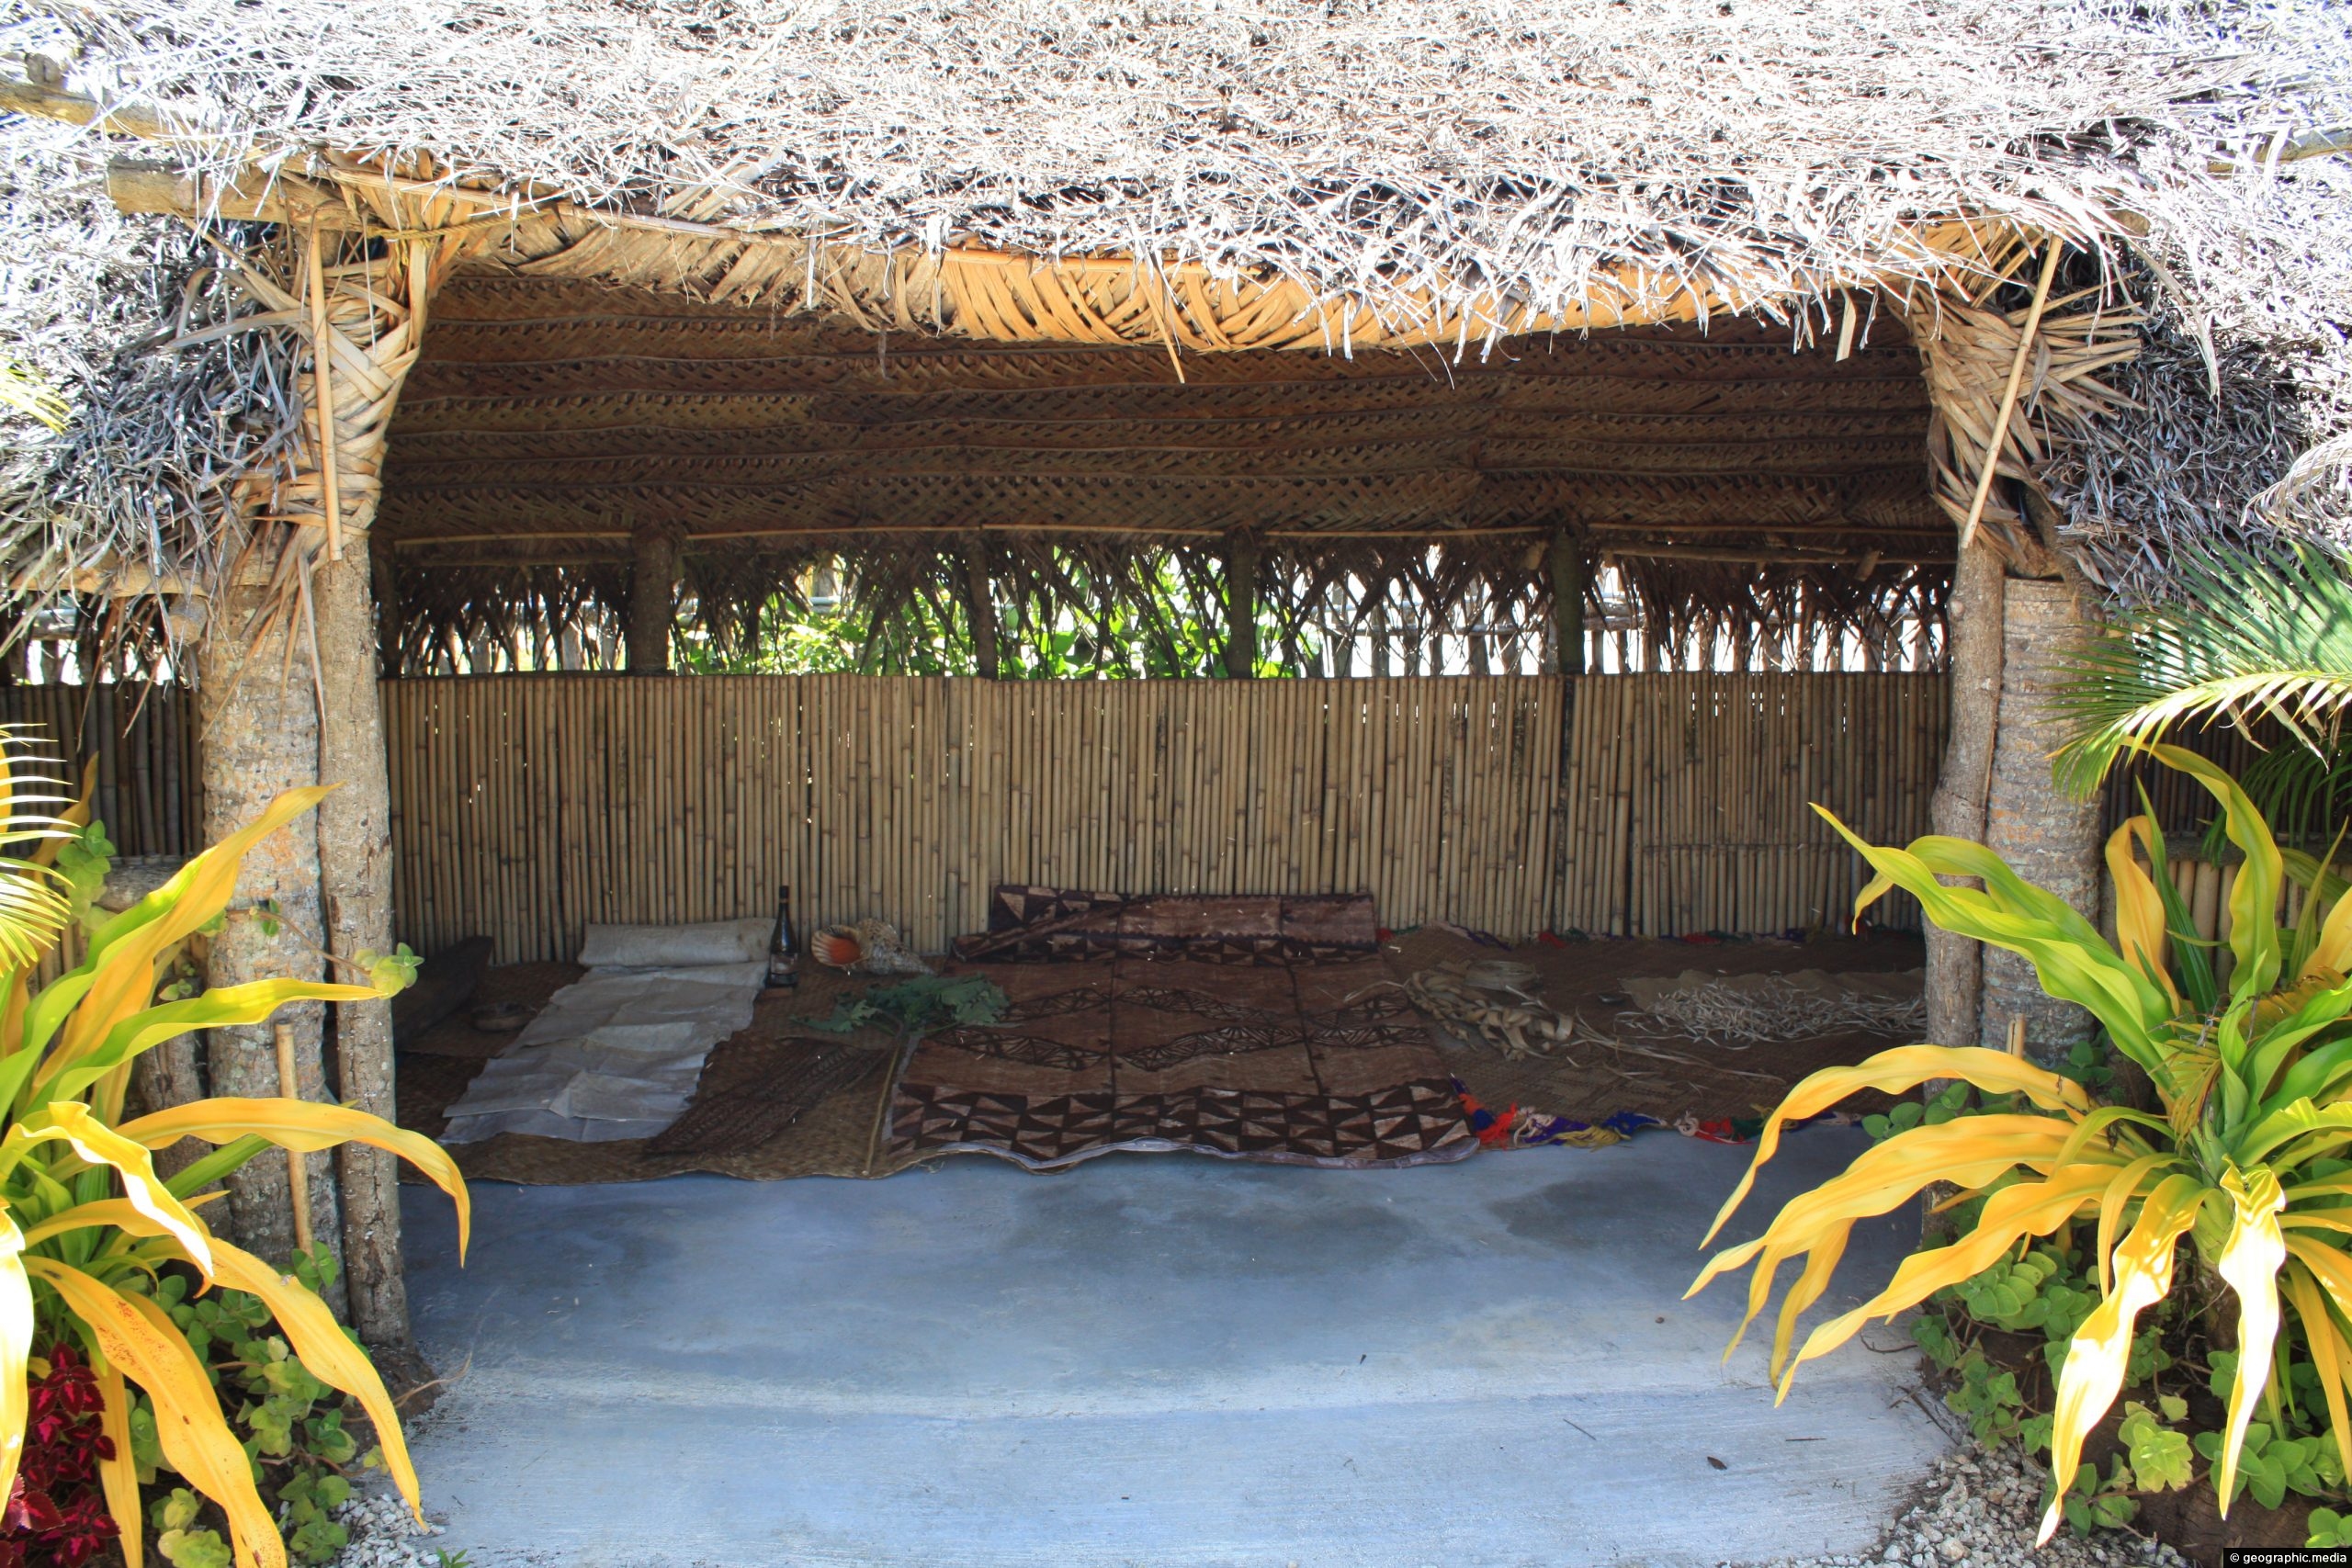 Interior view of a traditional fale in Tonga